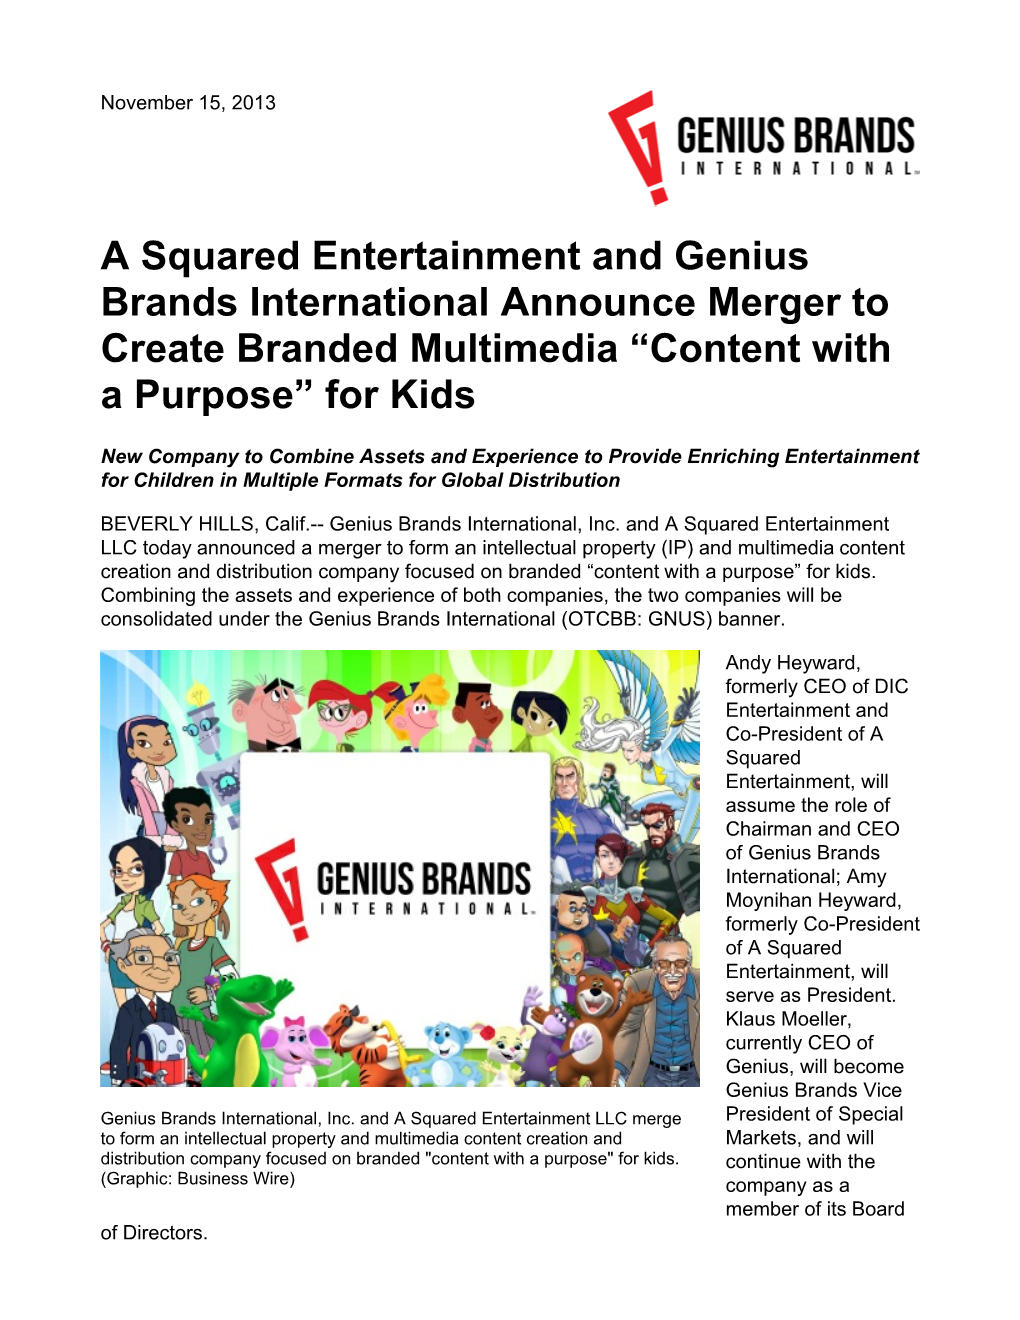 A Squared Entertainment and Genius Brands International Announce Merger to Create Branded Multimedia “Content with a Purpose” for Kids